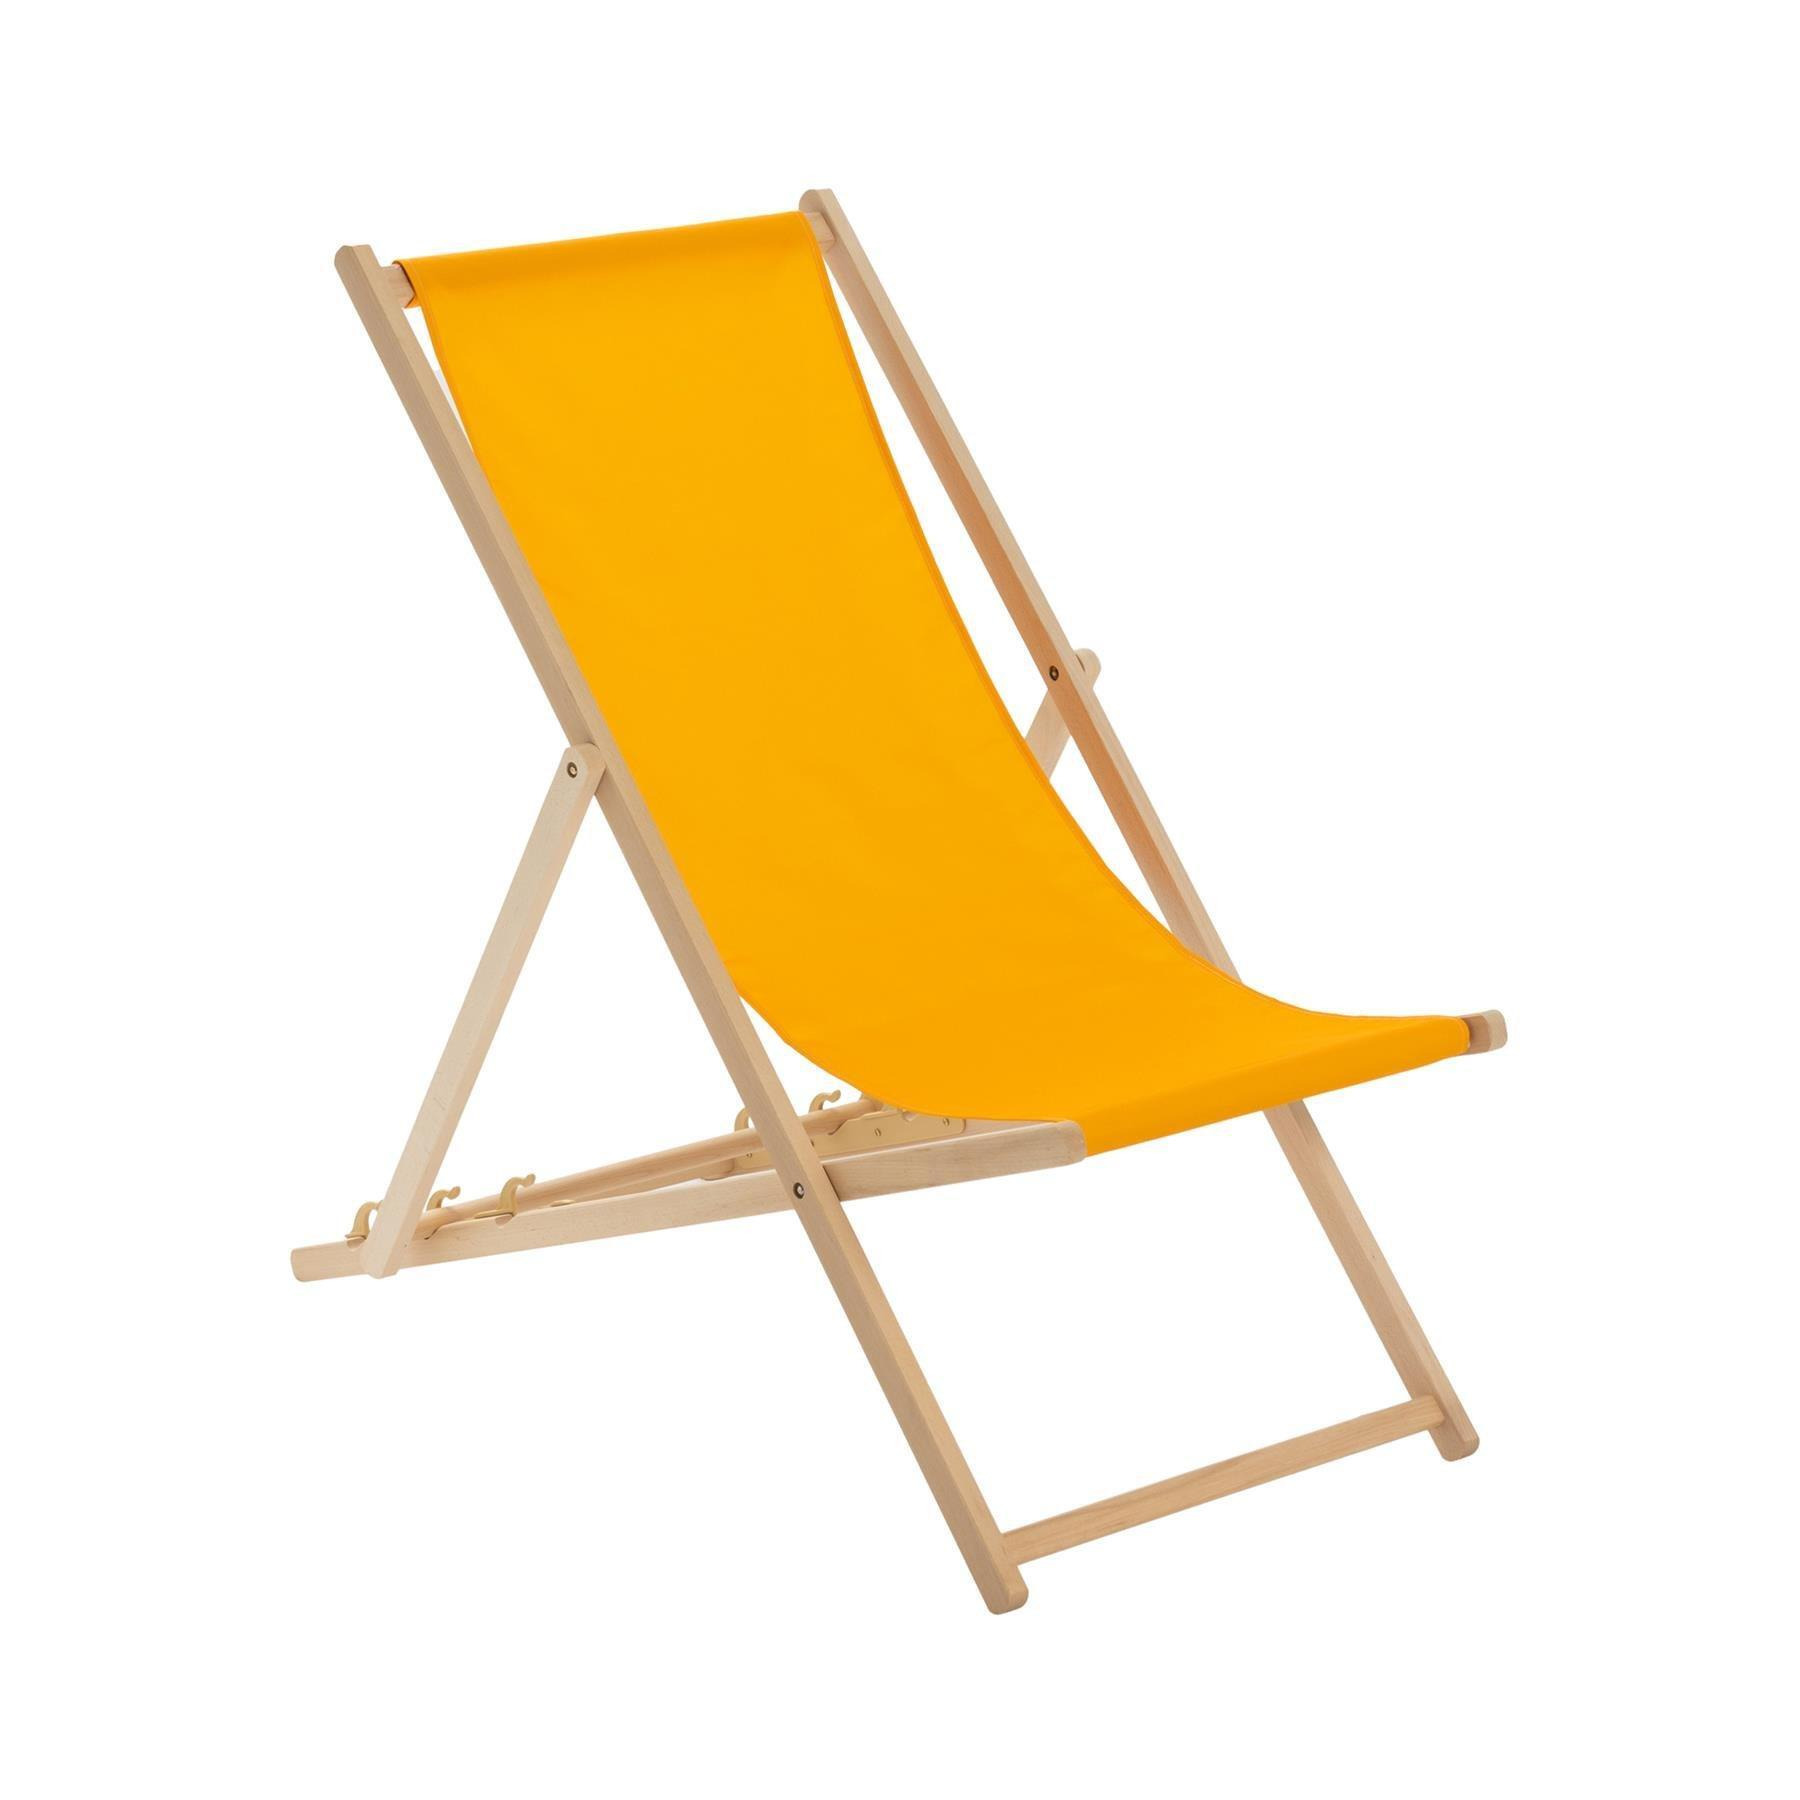 Folding Wooden Deck Chair - image 1